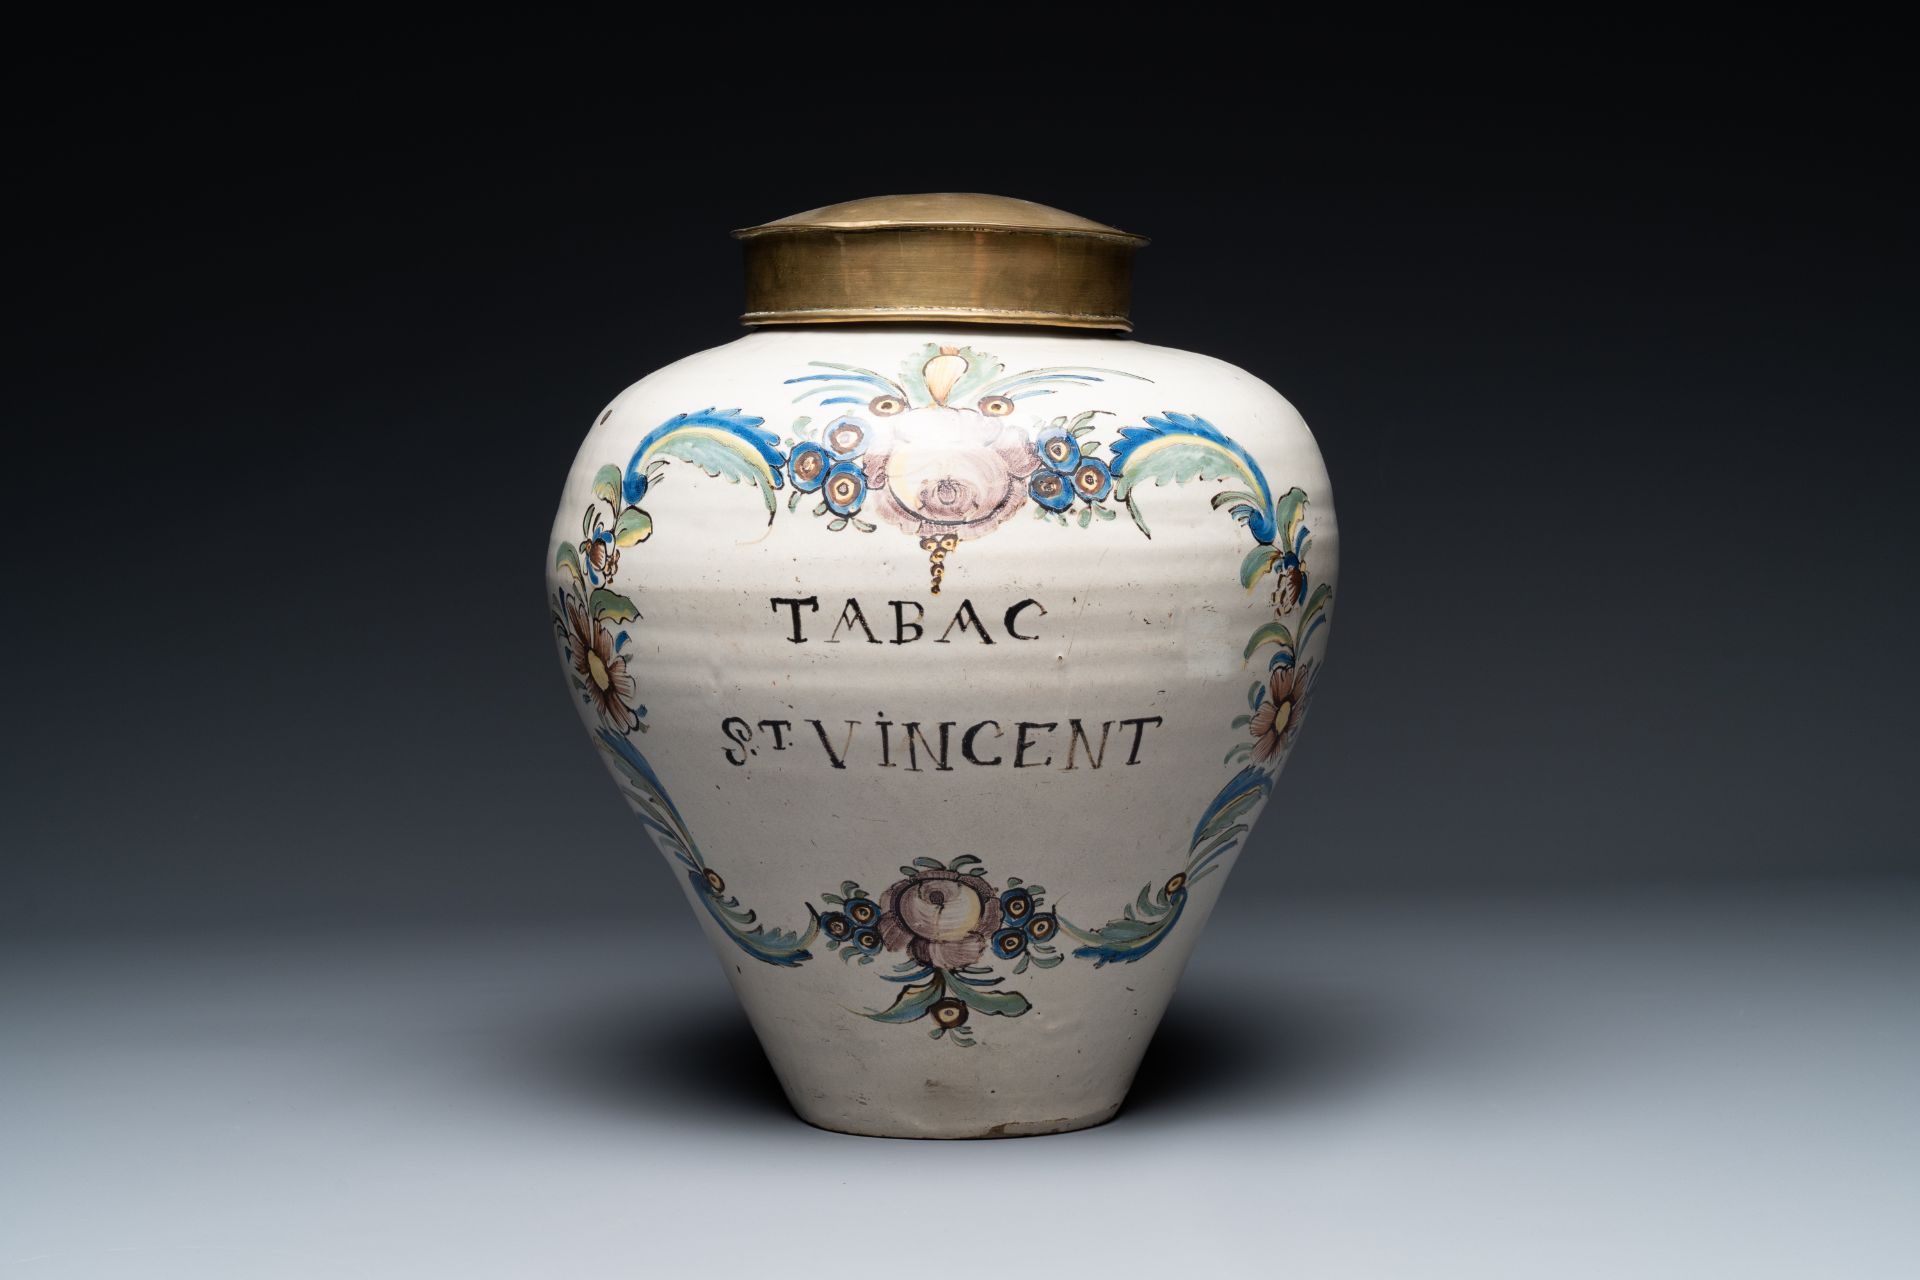 A polychrome pottery 'St. Vincent' tobacco jar, France, 18th century - Image 4 of 19